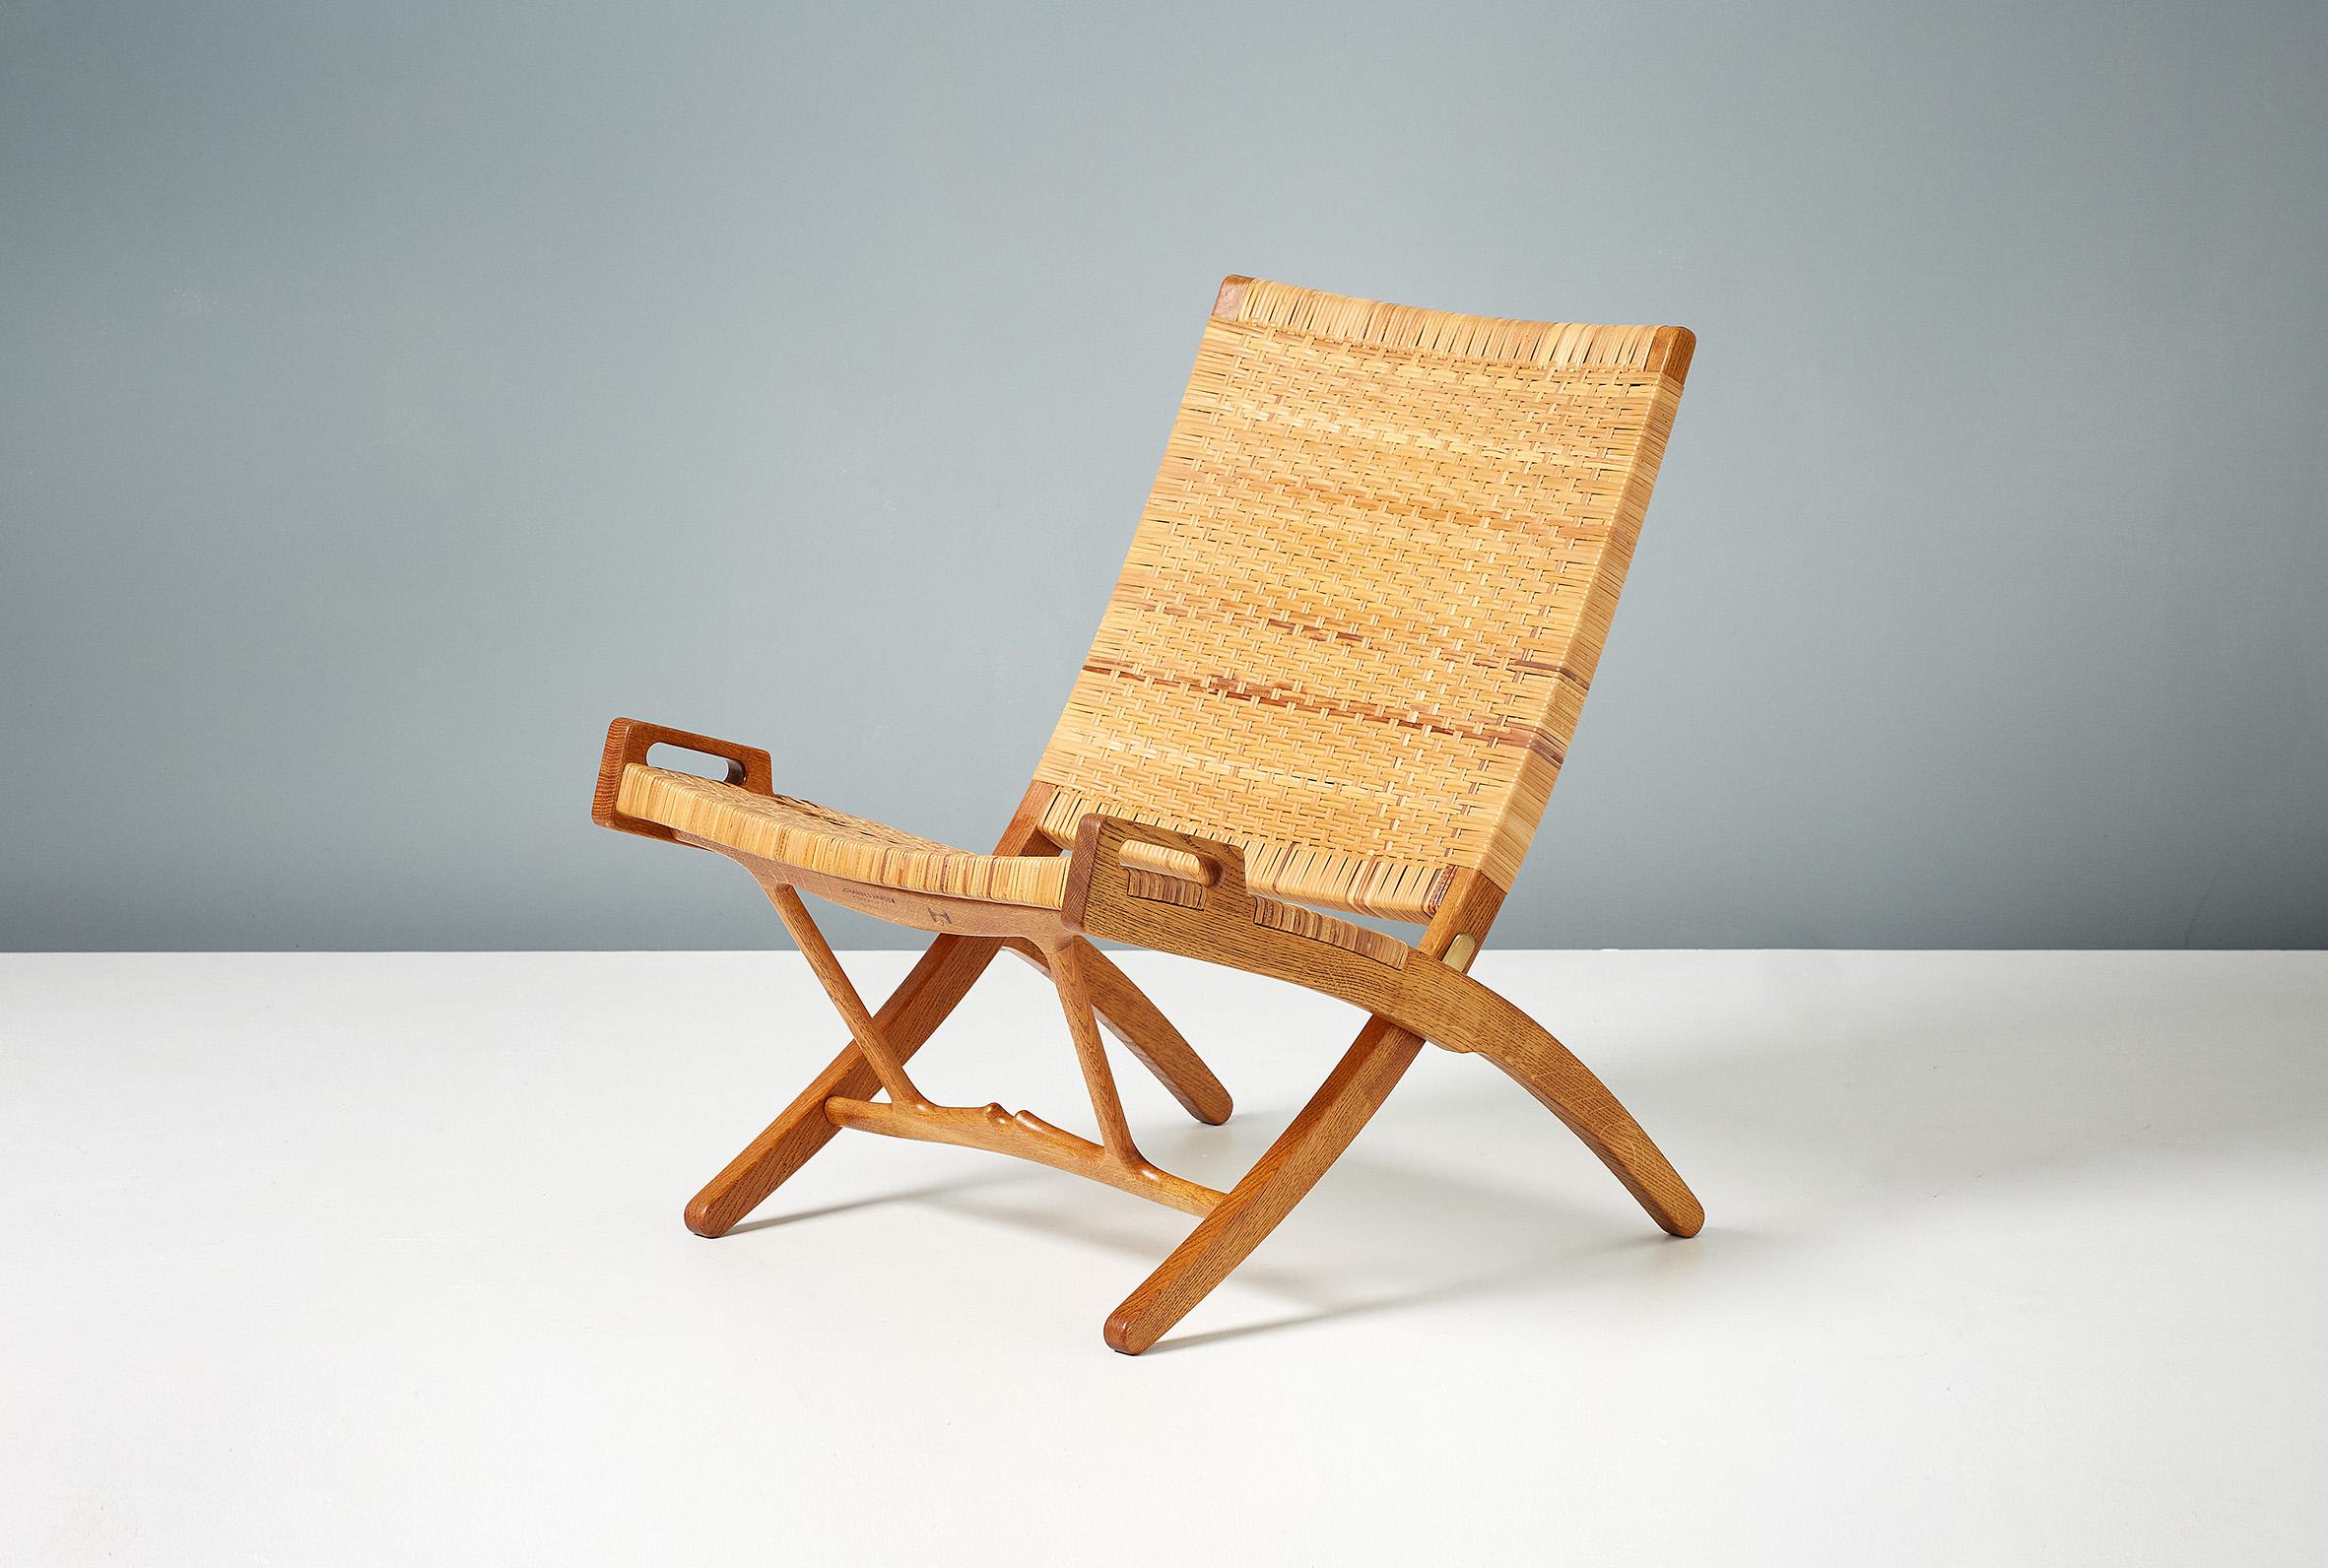 One of Danish master Hans J. Wegner's most important and iconic works. The Model 512 chair was produced by master cabinetmaker Johannes Hansen in Copenhagen during their golden period of collaboration that also produced the China chair, Wishbone